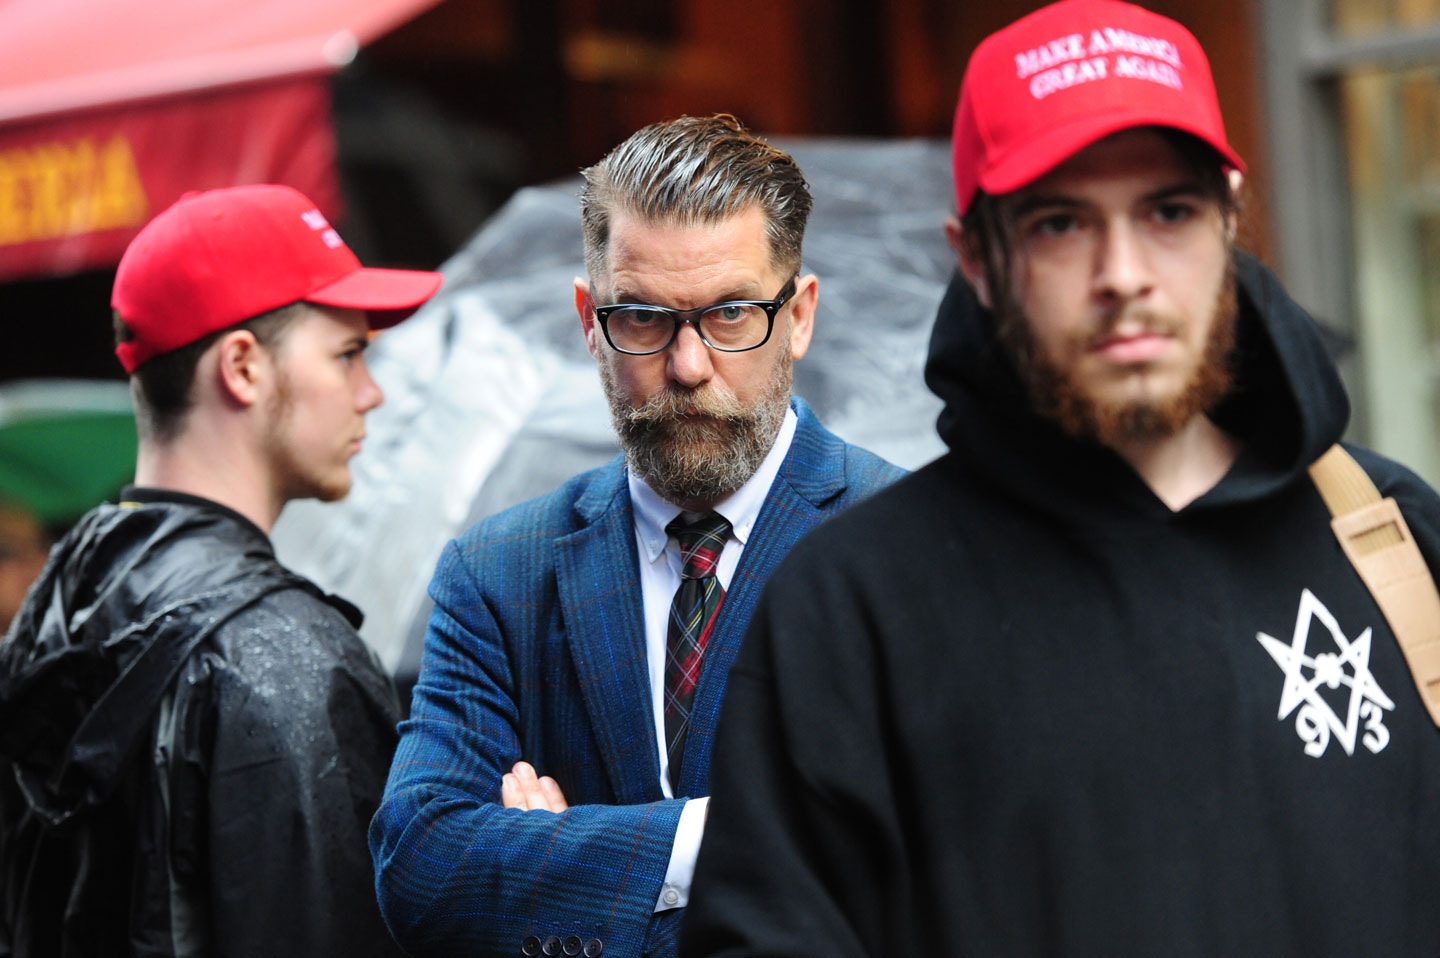 CENTER Gavin McInnes attends rally - Alt-right protestors hold rally in front of CUNY on East 42nd St. and 3rd ave to protest against CUNY's choice of Muslim-American activist Linda Sarsour as commencement speaker on Thursday May 25, 2017 (Photo by Susan Watts/NY Daily News via Getty Images)